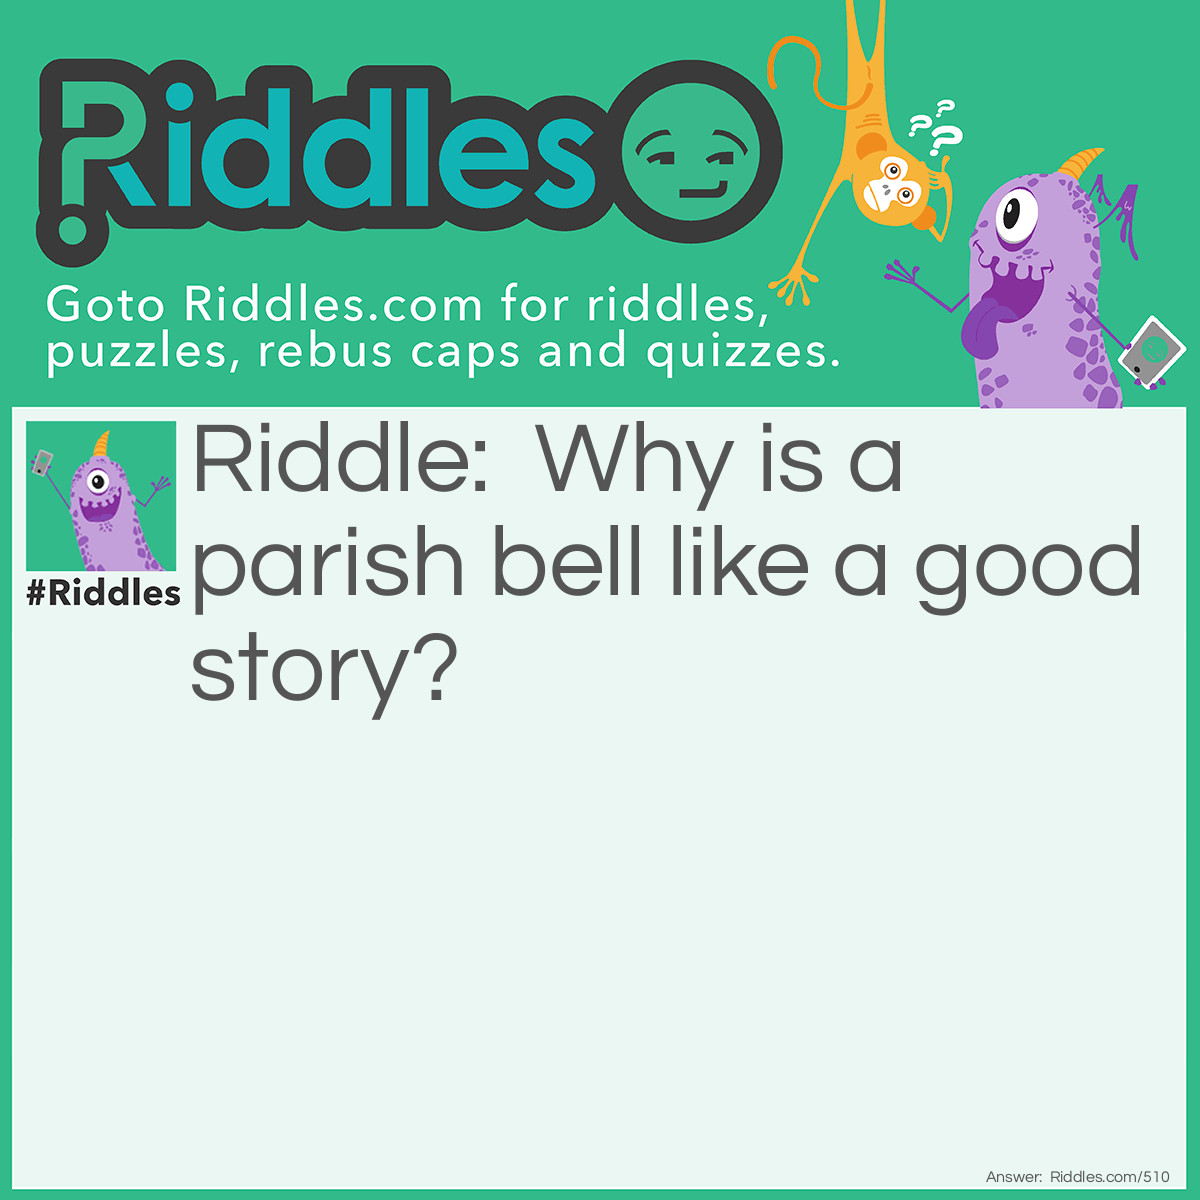 Riddle: Why is a parish bell like a good story? Answer: Because it is often tolled (told).